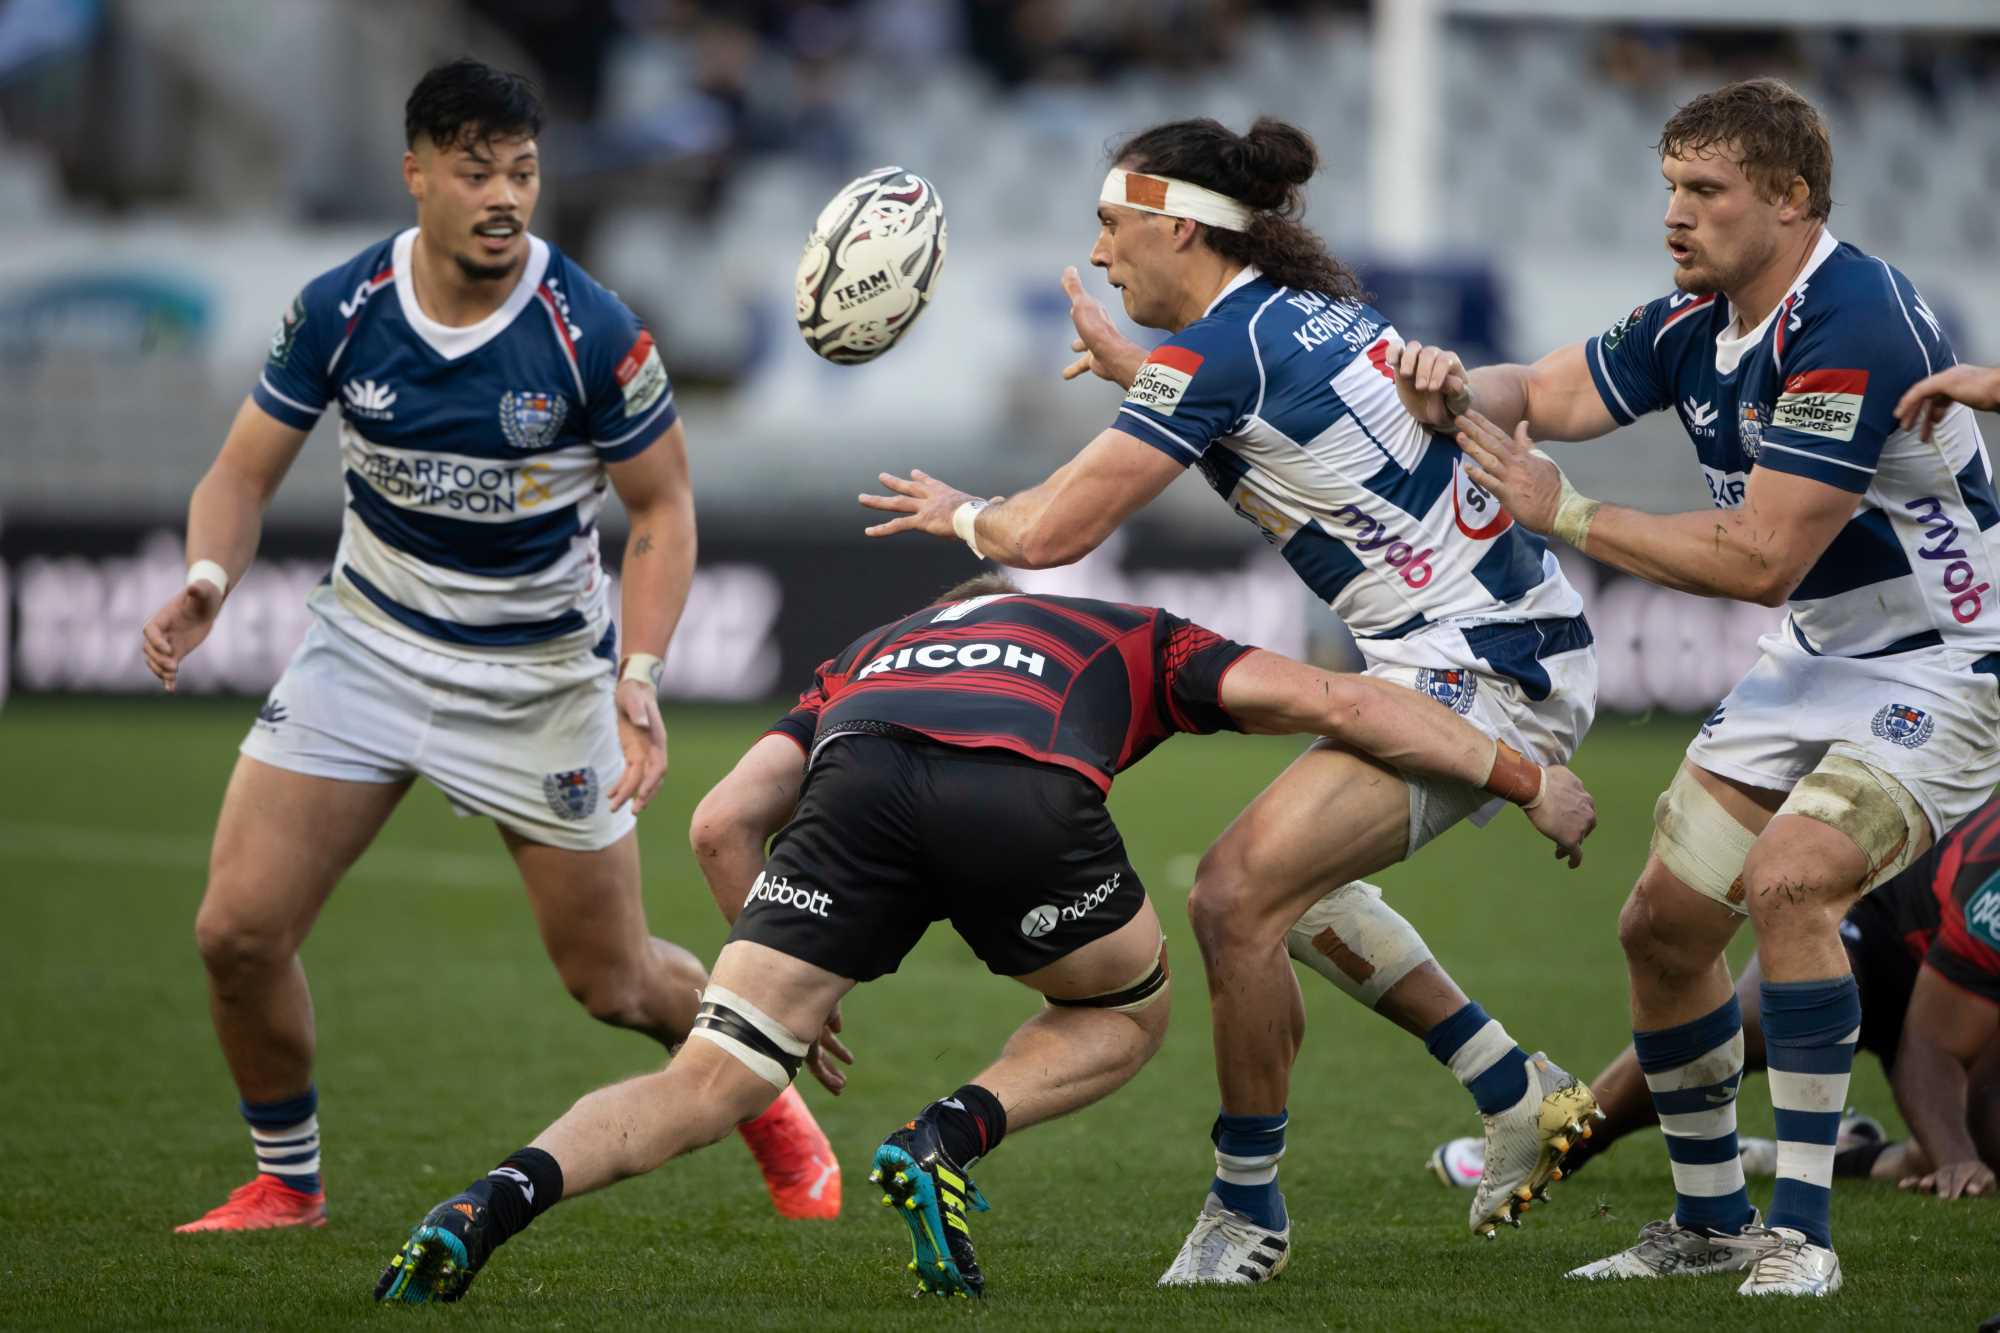 Auckland head to the sunshine city to face the Mako